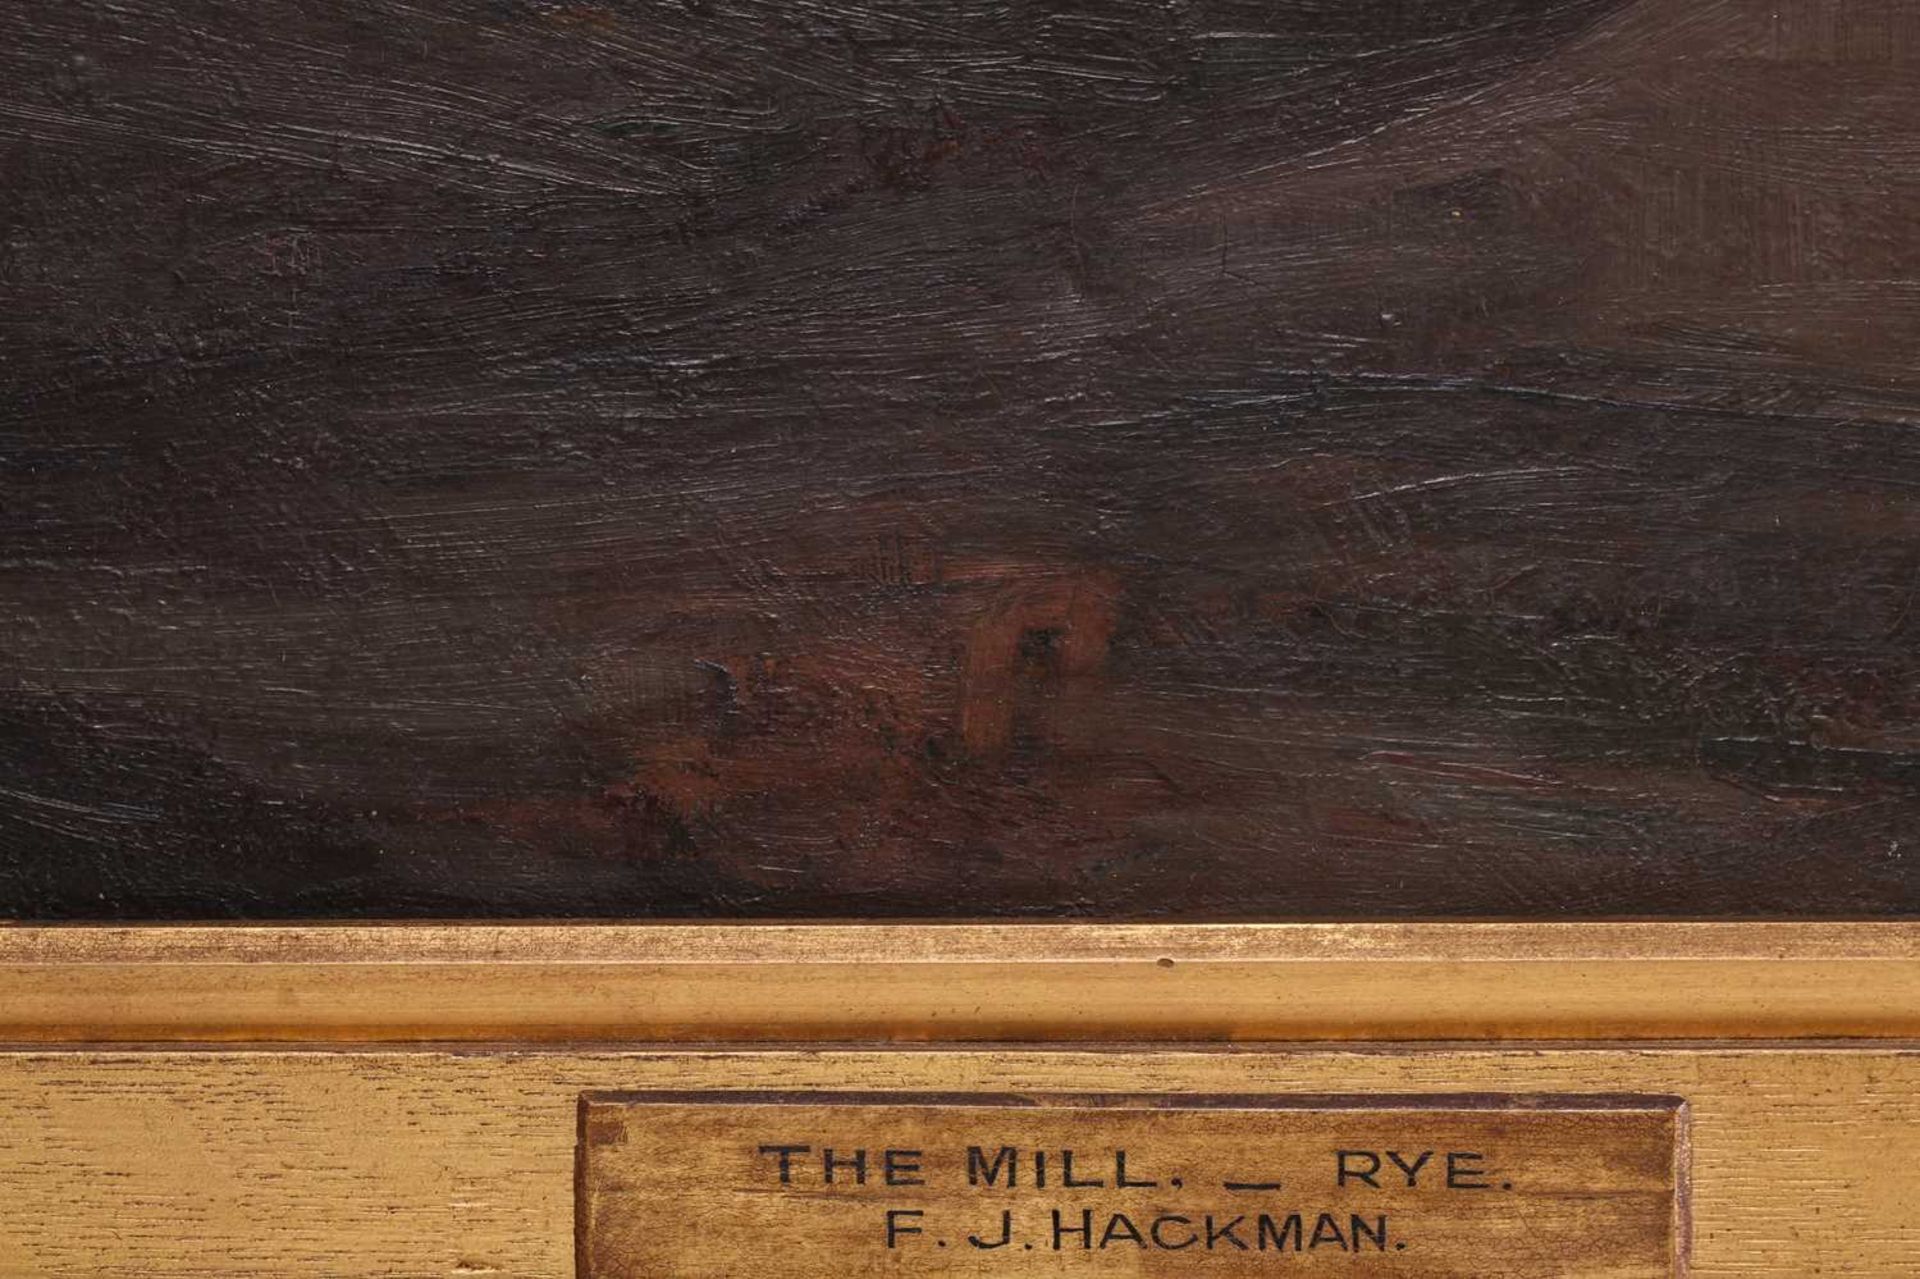 Frederick James Hackman (19th/20th century), 'The Mill, Rye', oil on canvas, mounted in an ornate - Image 8 of 22